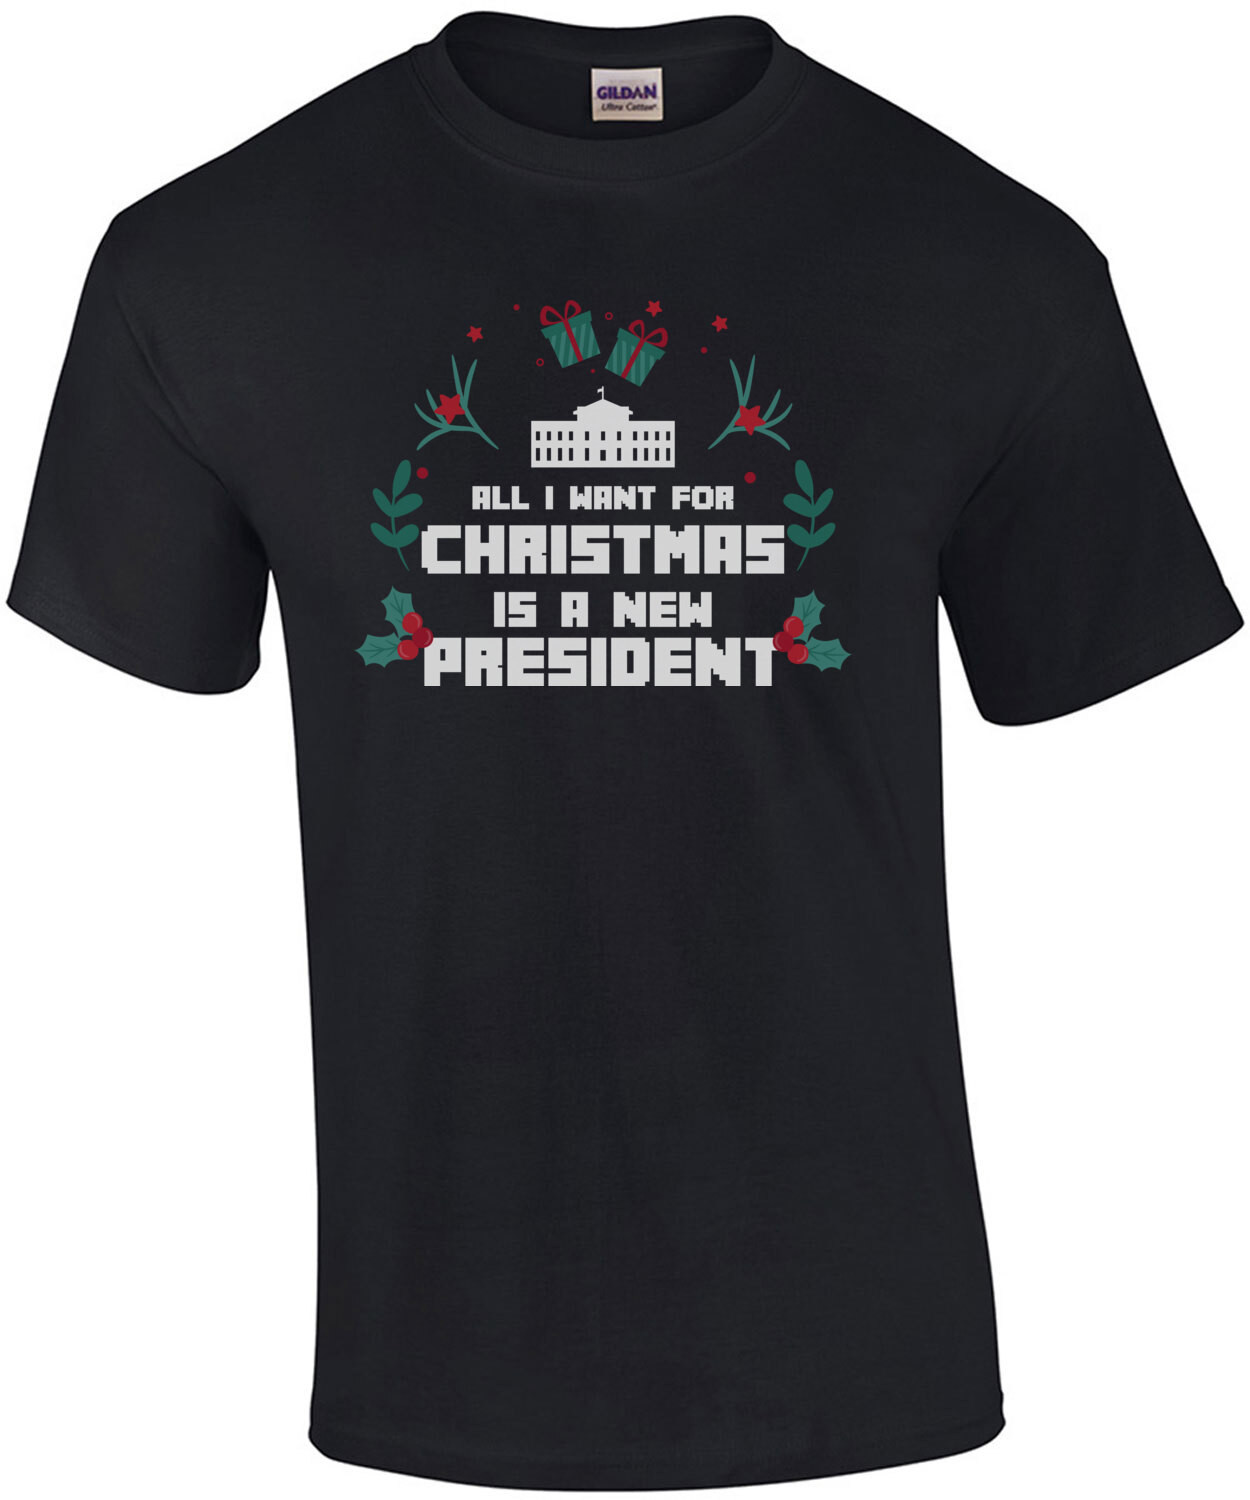 All I want for Christmas is a new president - Ugly Christmas Sweater - Funny Christmas T-Shirt